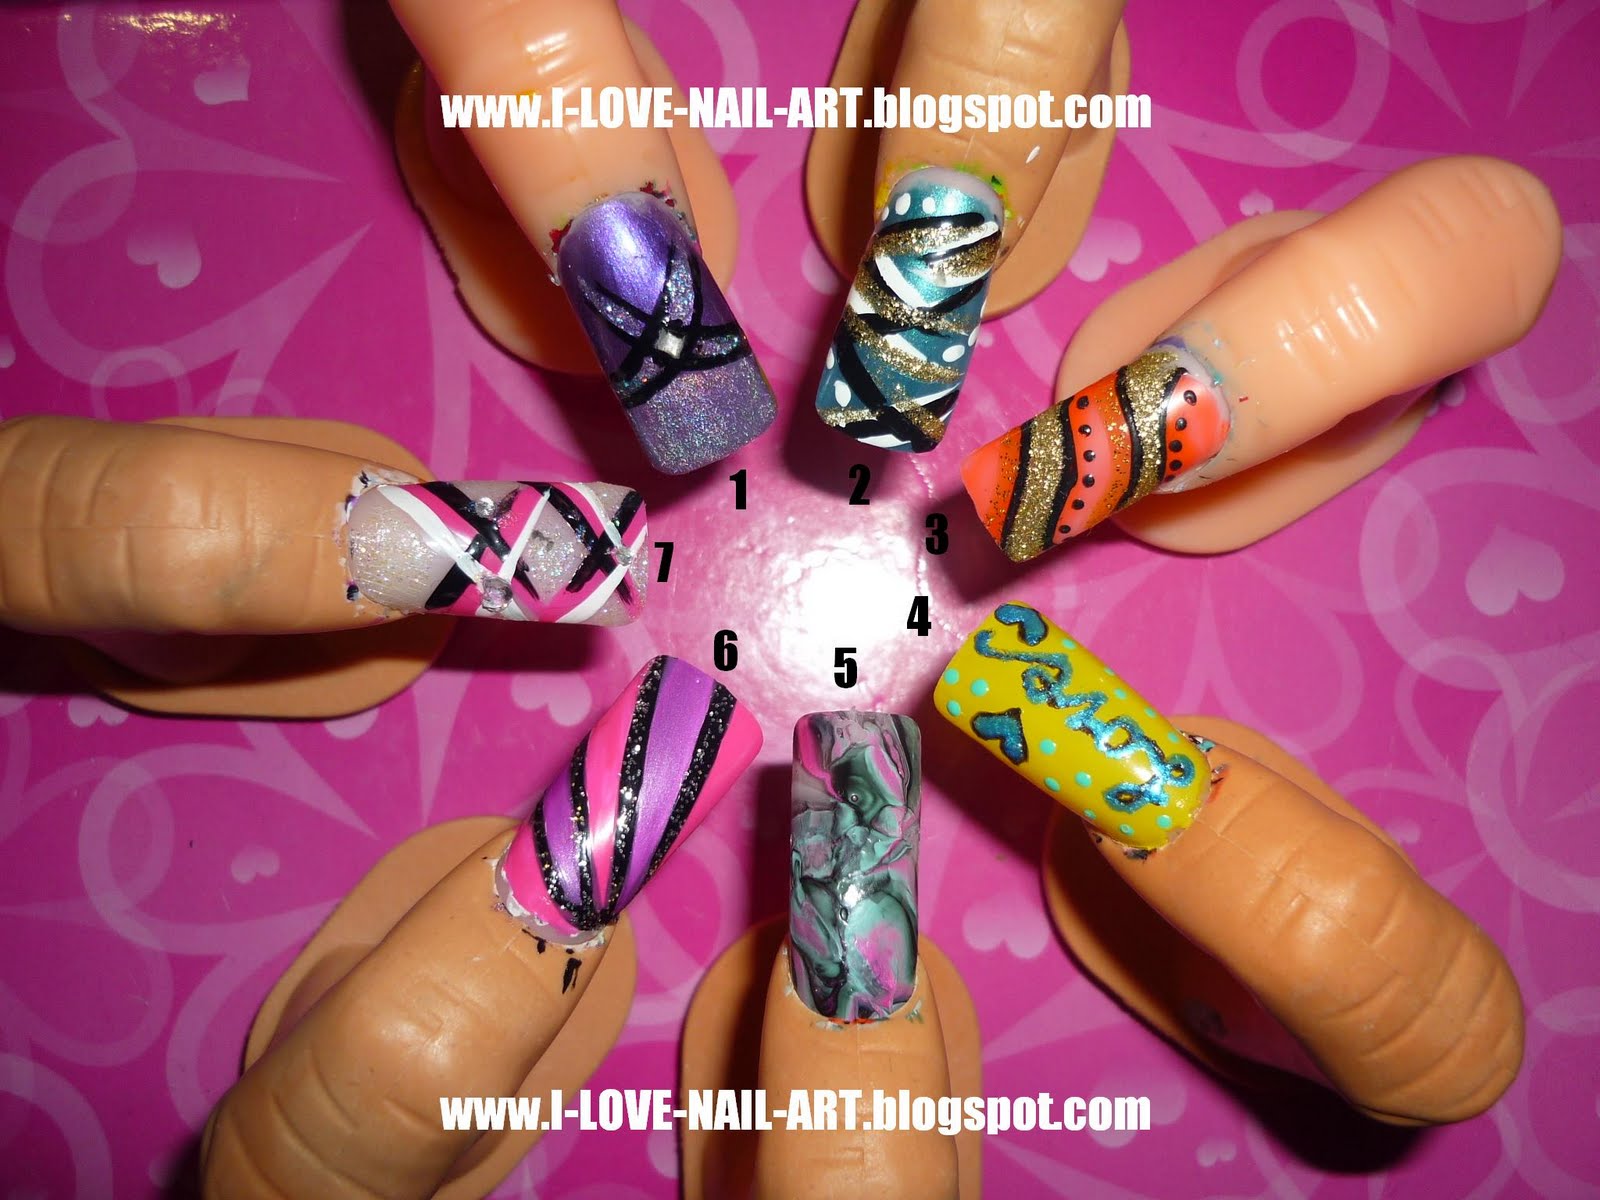 10. Tropicture Al Nail Art Inspiration and Trends - wide 5